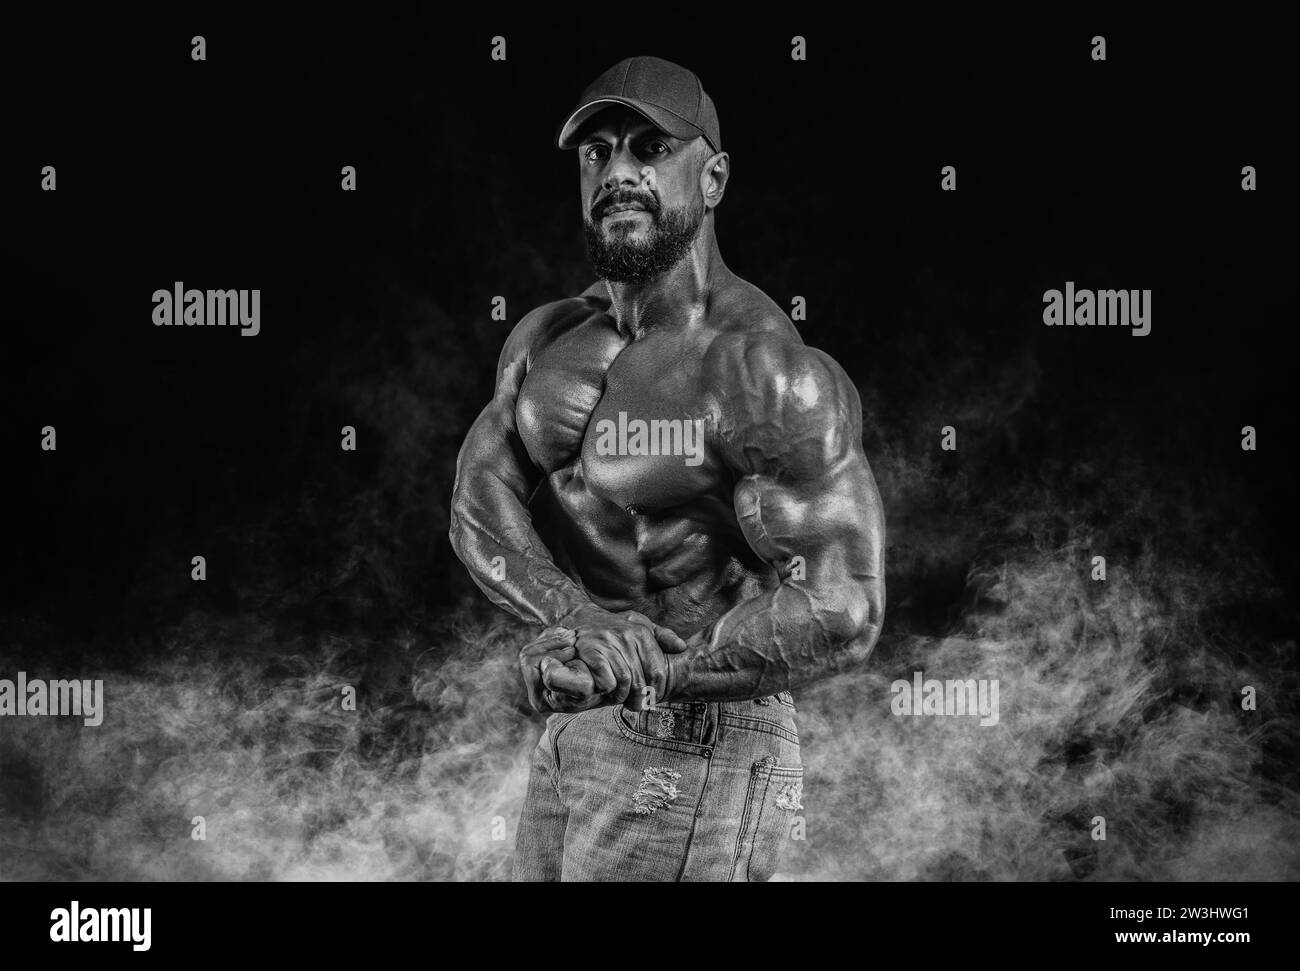 Muscular athlete posing in the studio. Fitness and classic bodybuilding concept. Mixed media Stock Photo